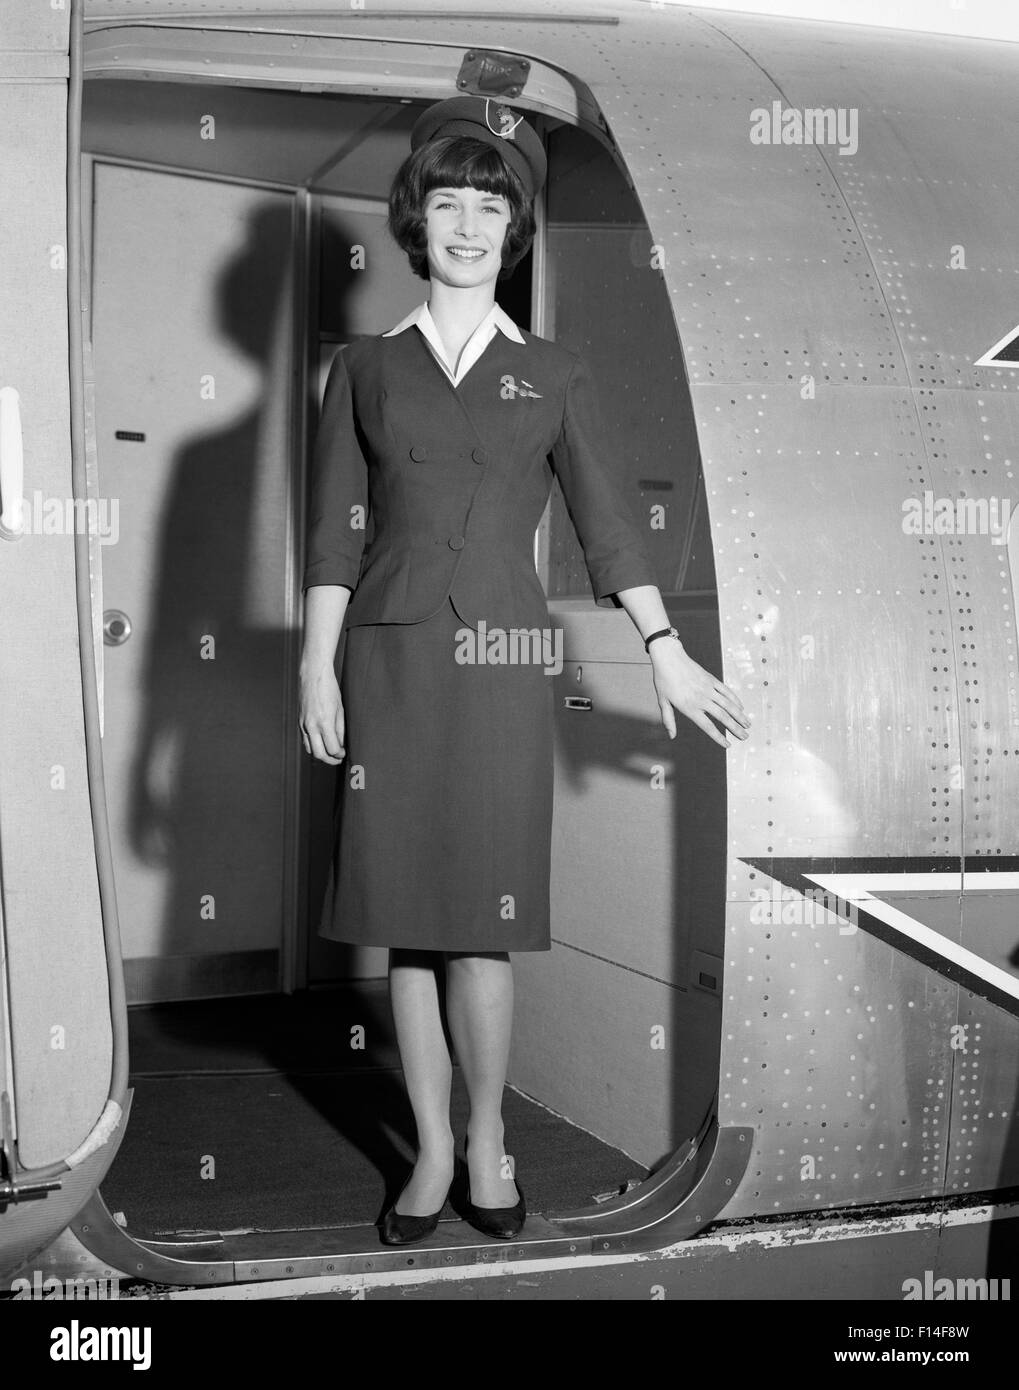 1960s SMILING STEWARDESS STANDING IN DOORWAY OF AIRPLANE LOOKING AT CAMERA Stock Photo